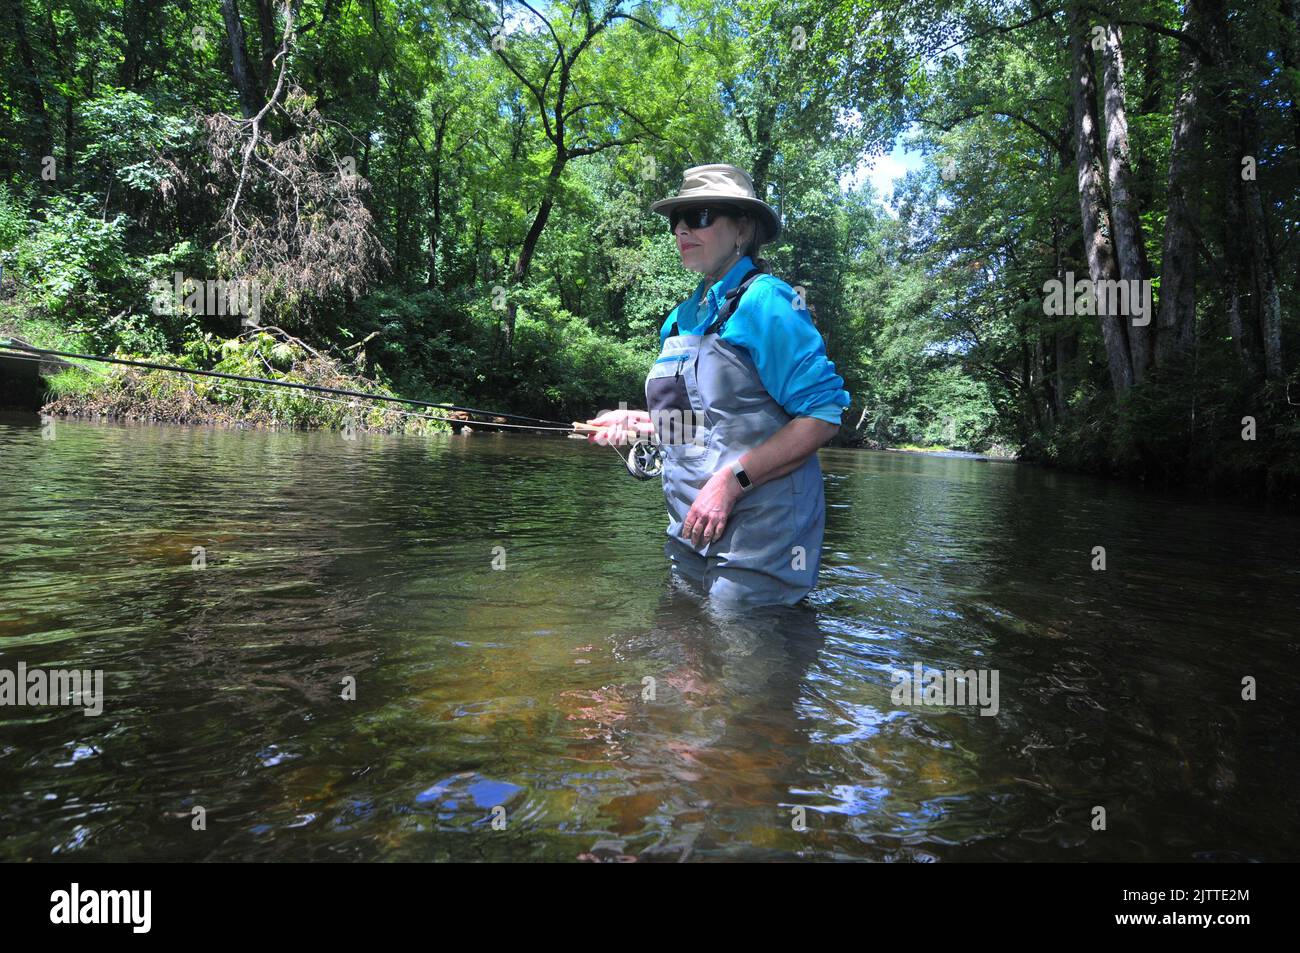 A trout angler works a quiet pool of the Davidson River in North Carolina's Appalachian Mountains. Stock Photo